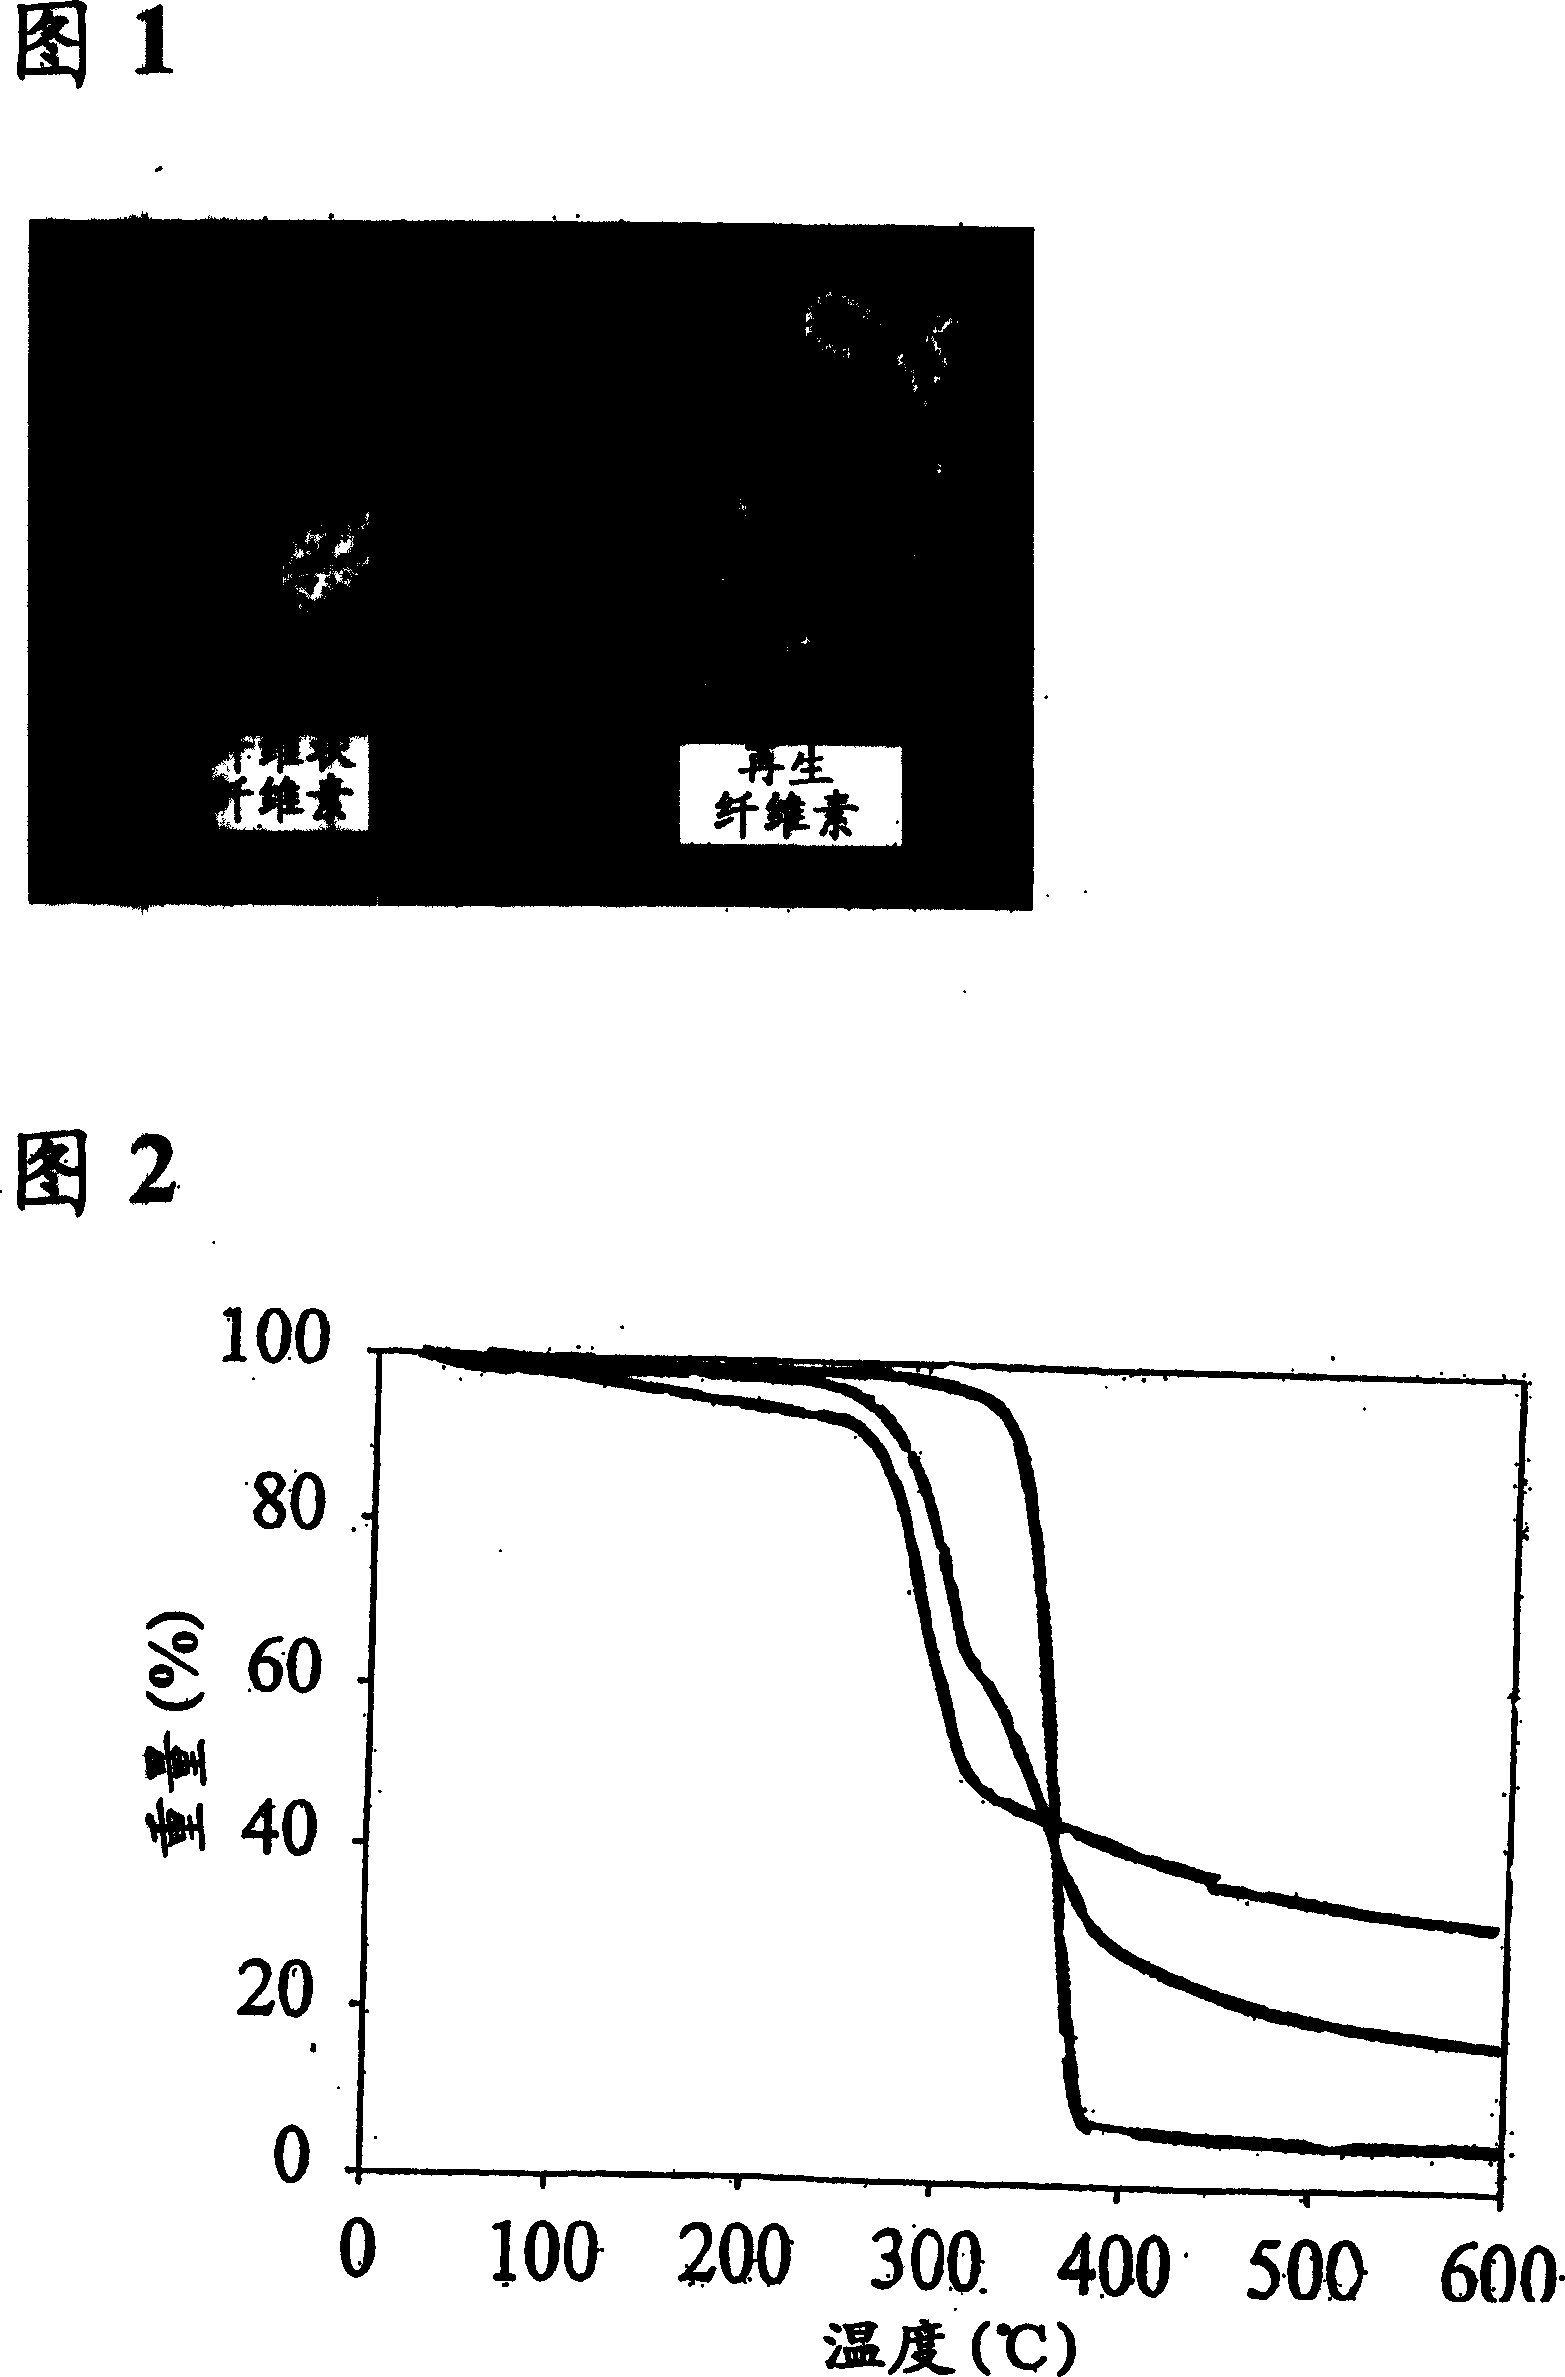 Dissolution and processing of cellulose using ionic liquids